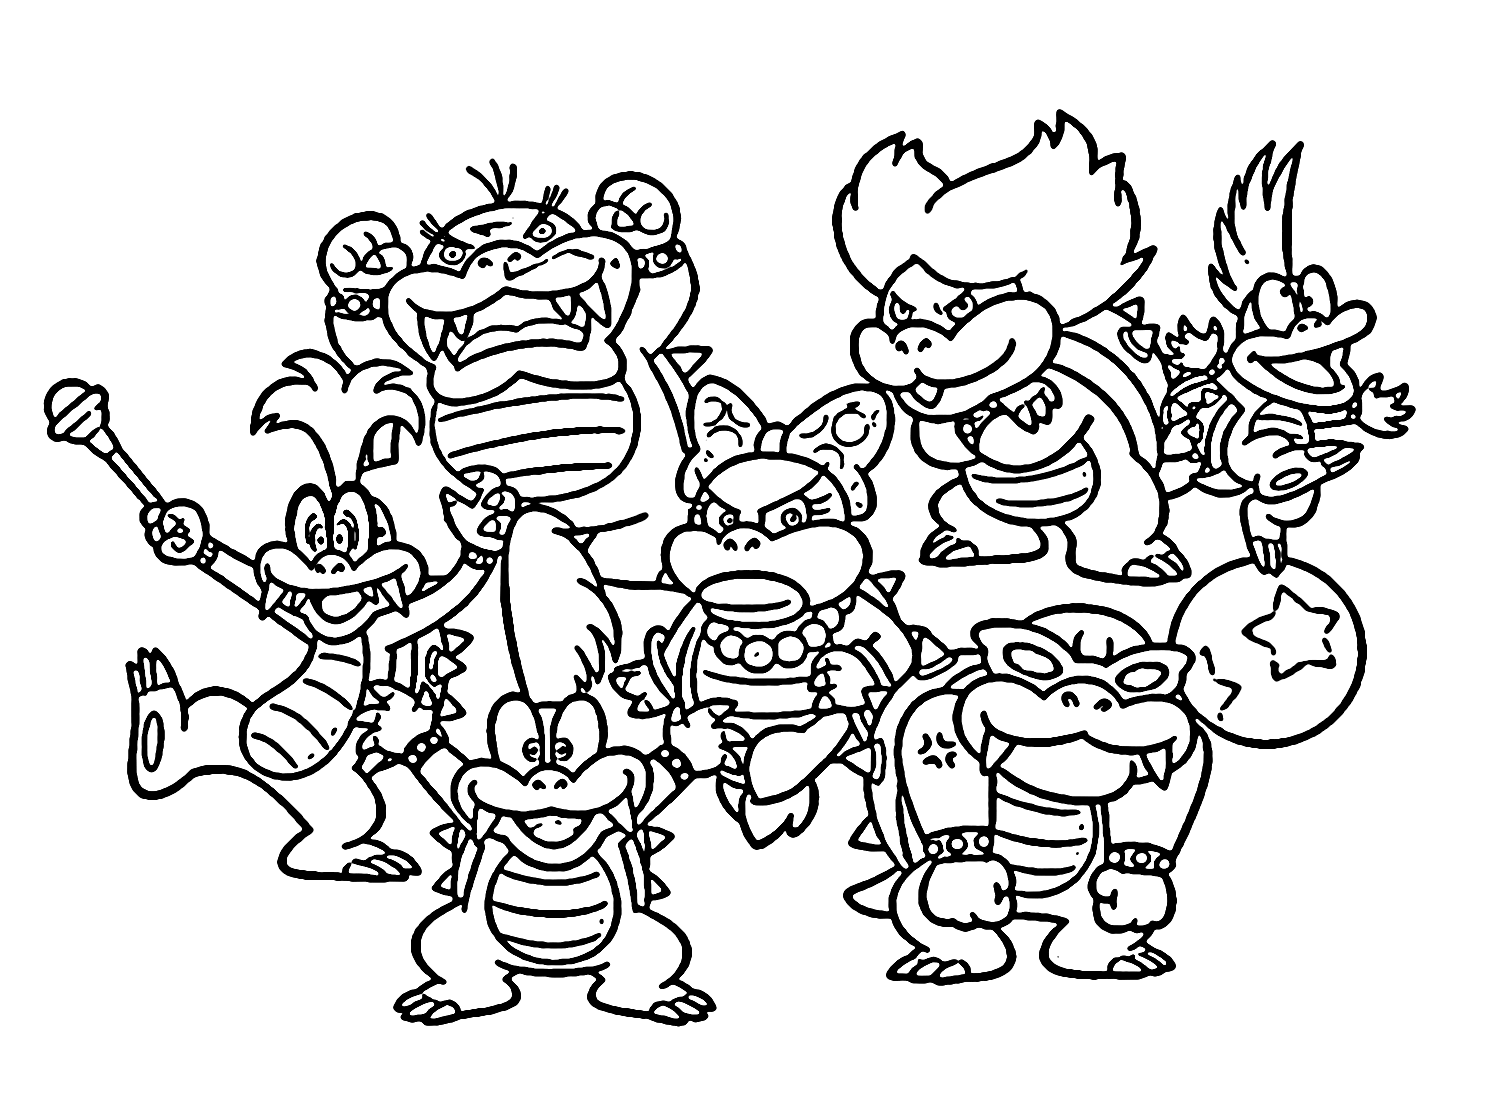 Koopalings Pictures Coloring Pages